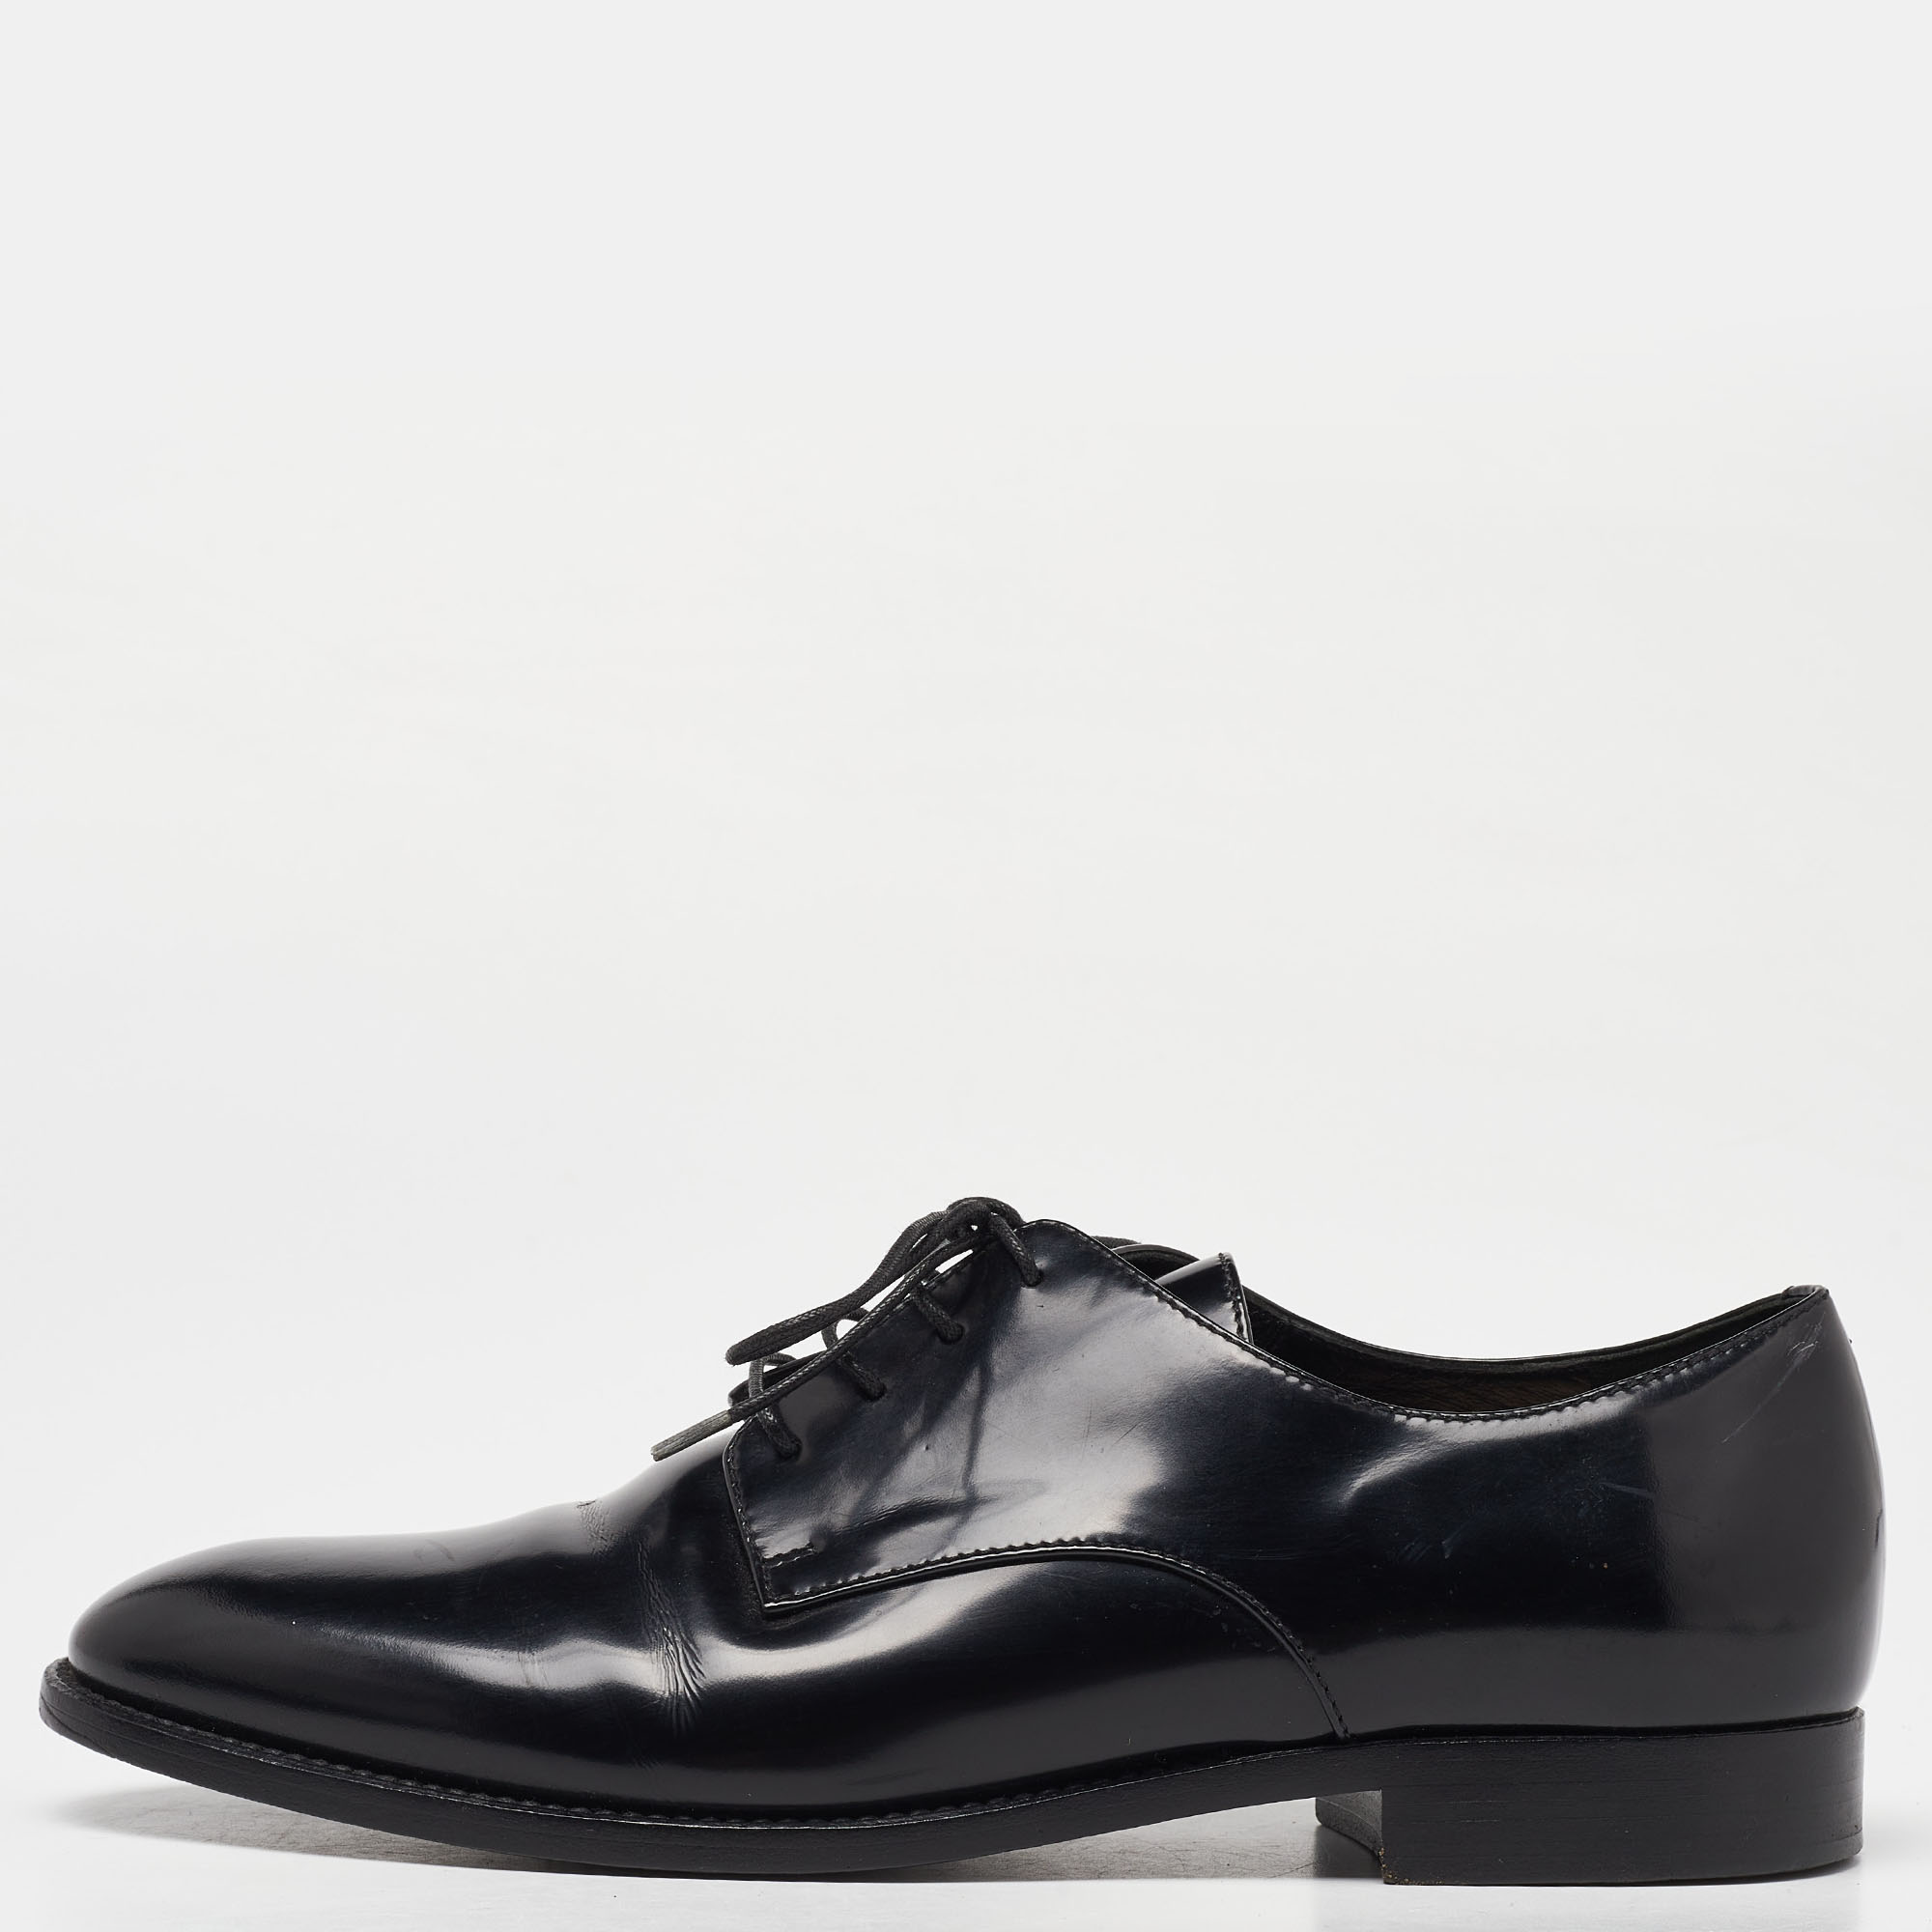 Dior black leather lace up derby size 37.5